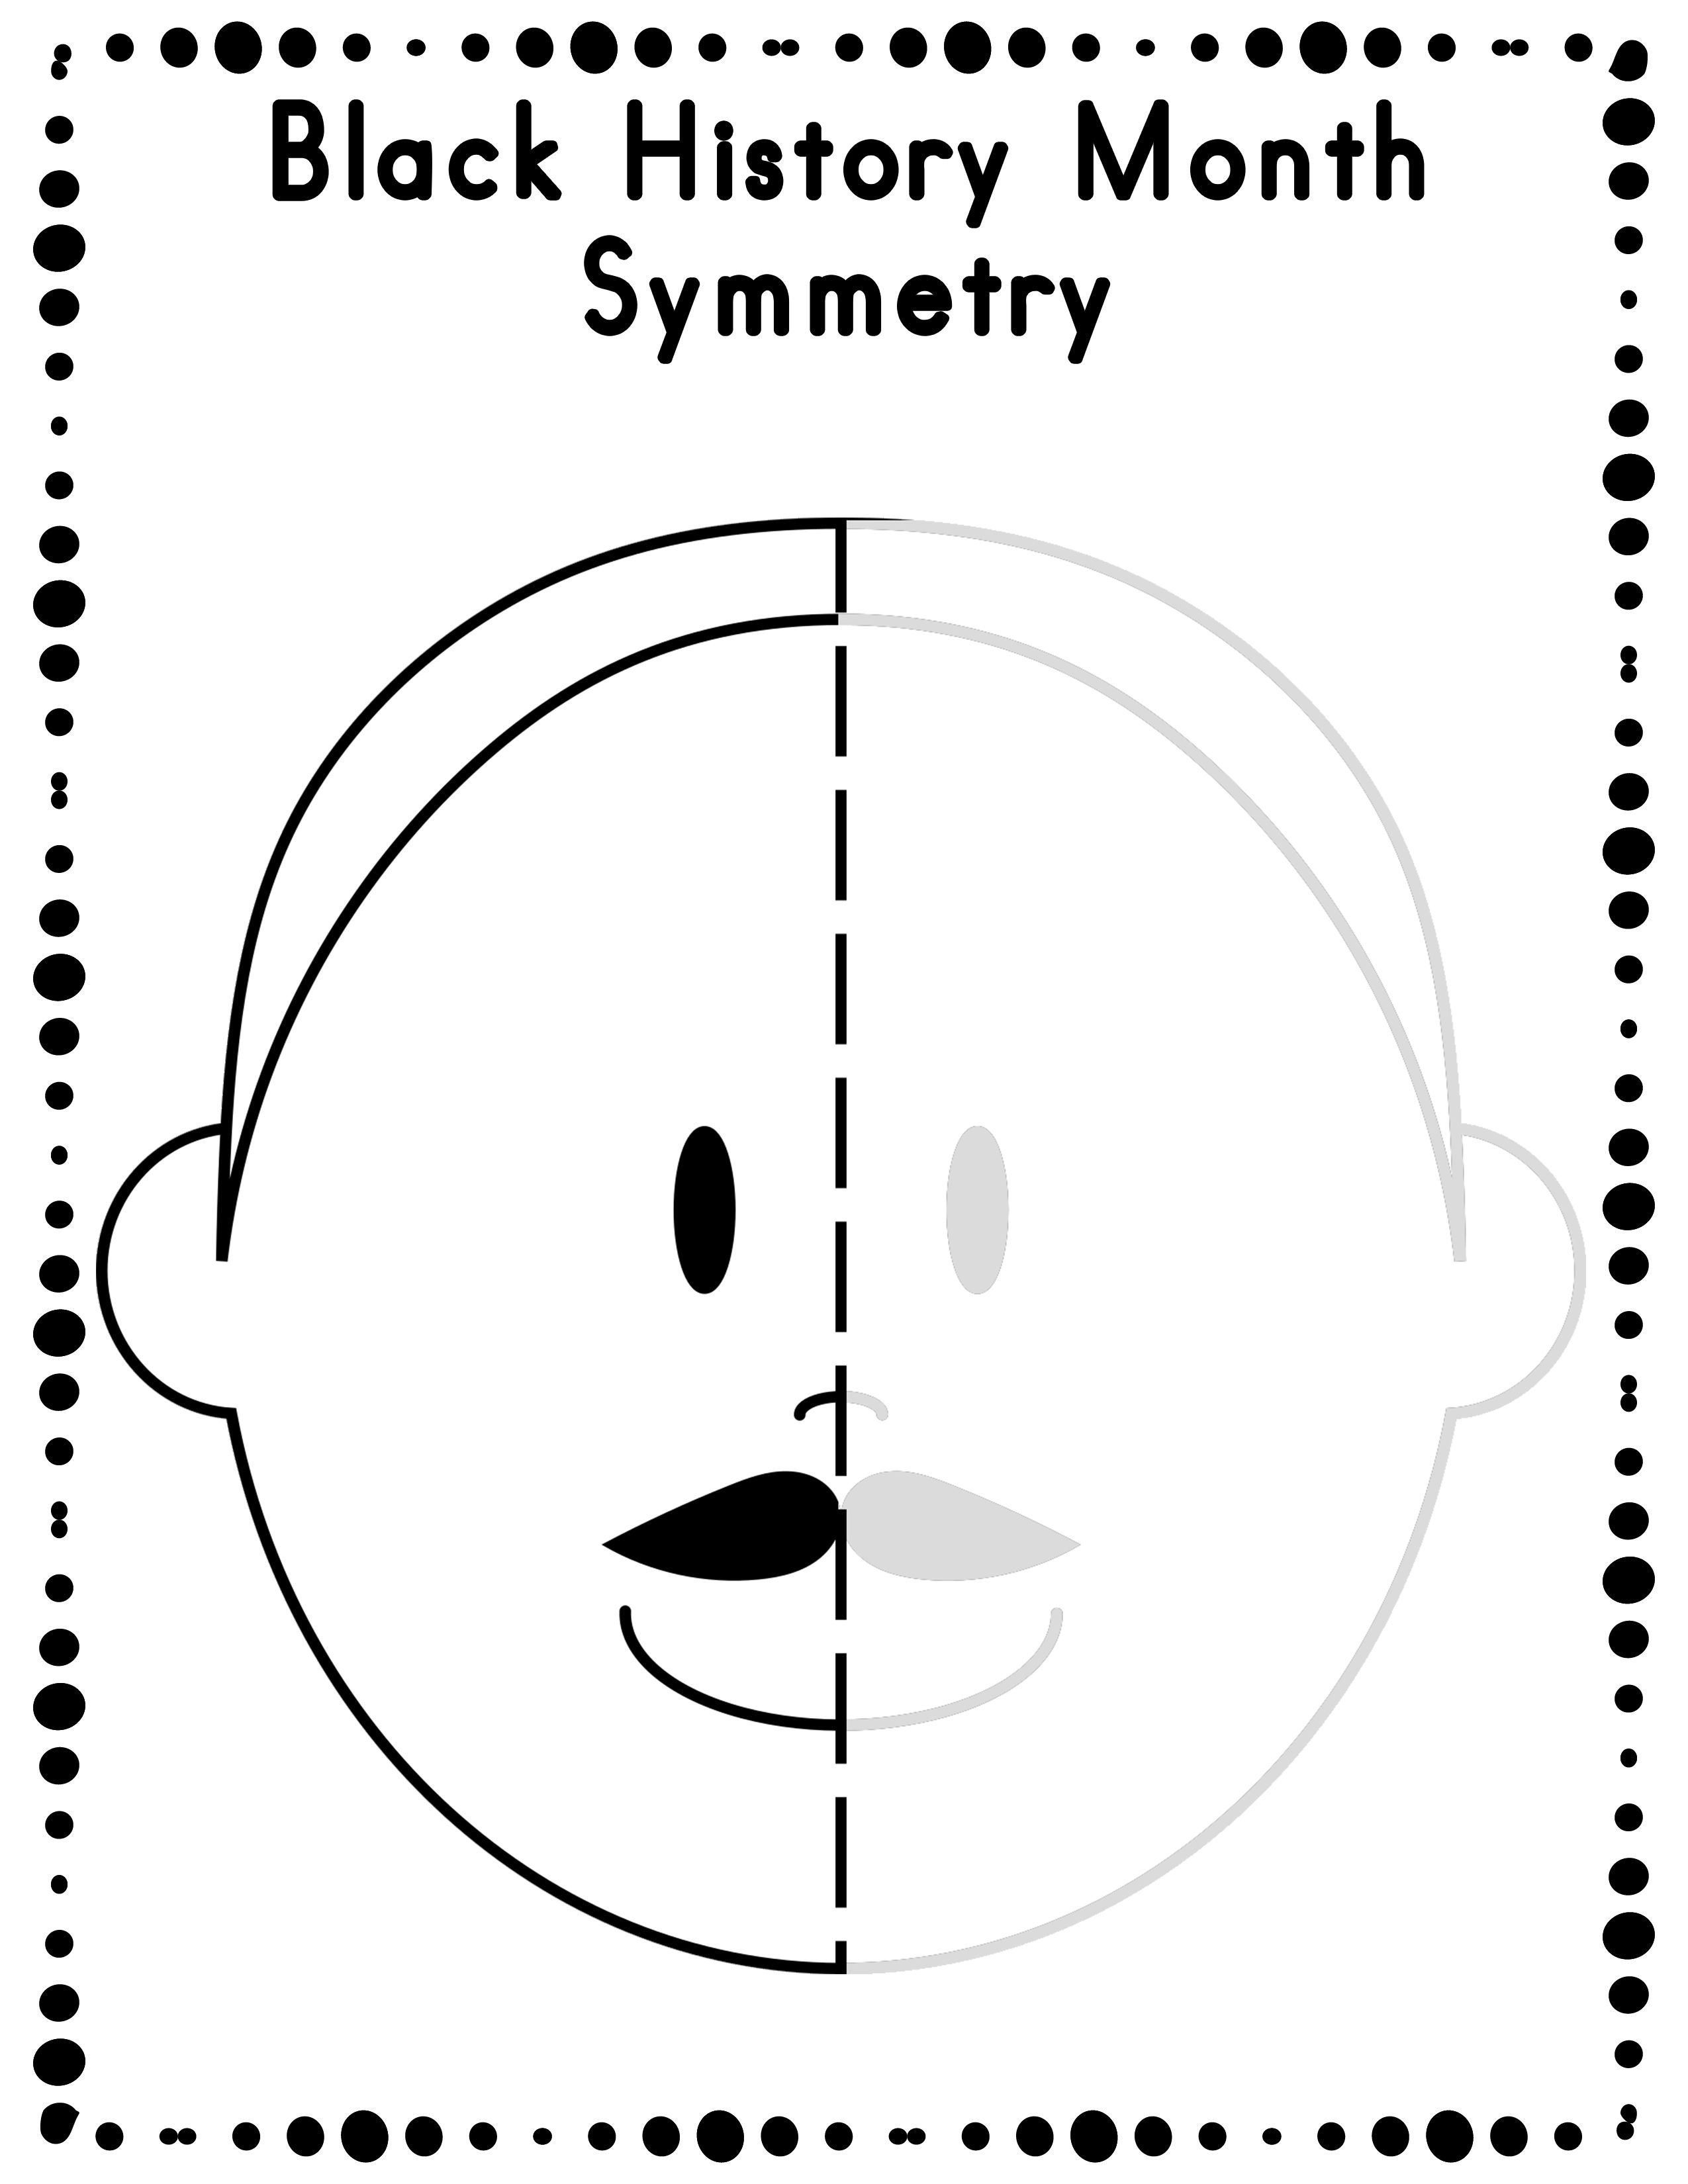 Free Black History Month Symmetry Activity Worksheets | Classroom - Free Printable Black History Month Word Search